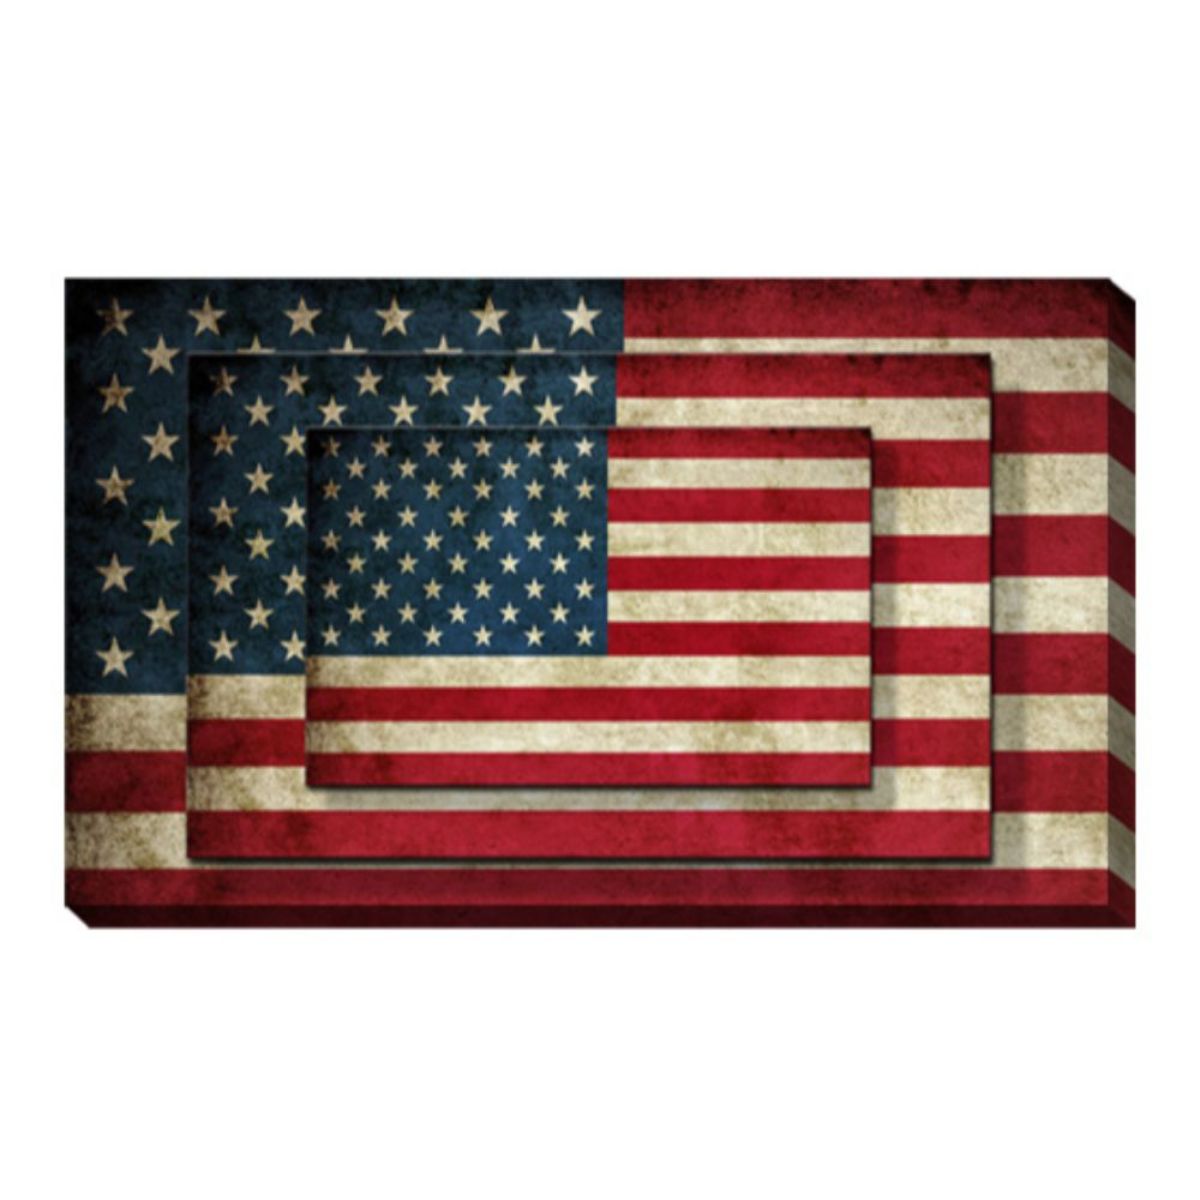 the Stars and the Stripes 36"x18" x 3 3 Panel Vintage American Flag Canvas 